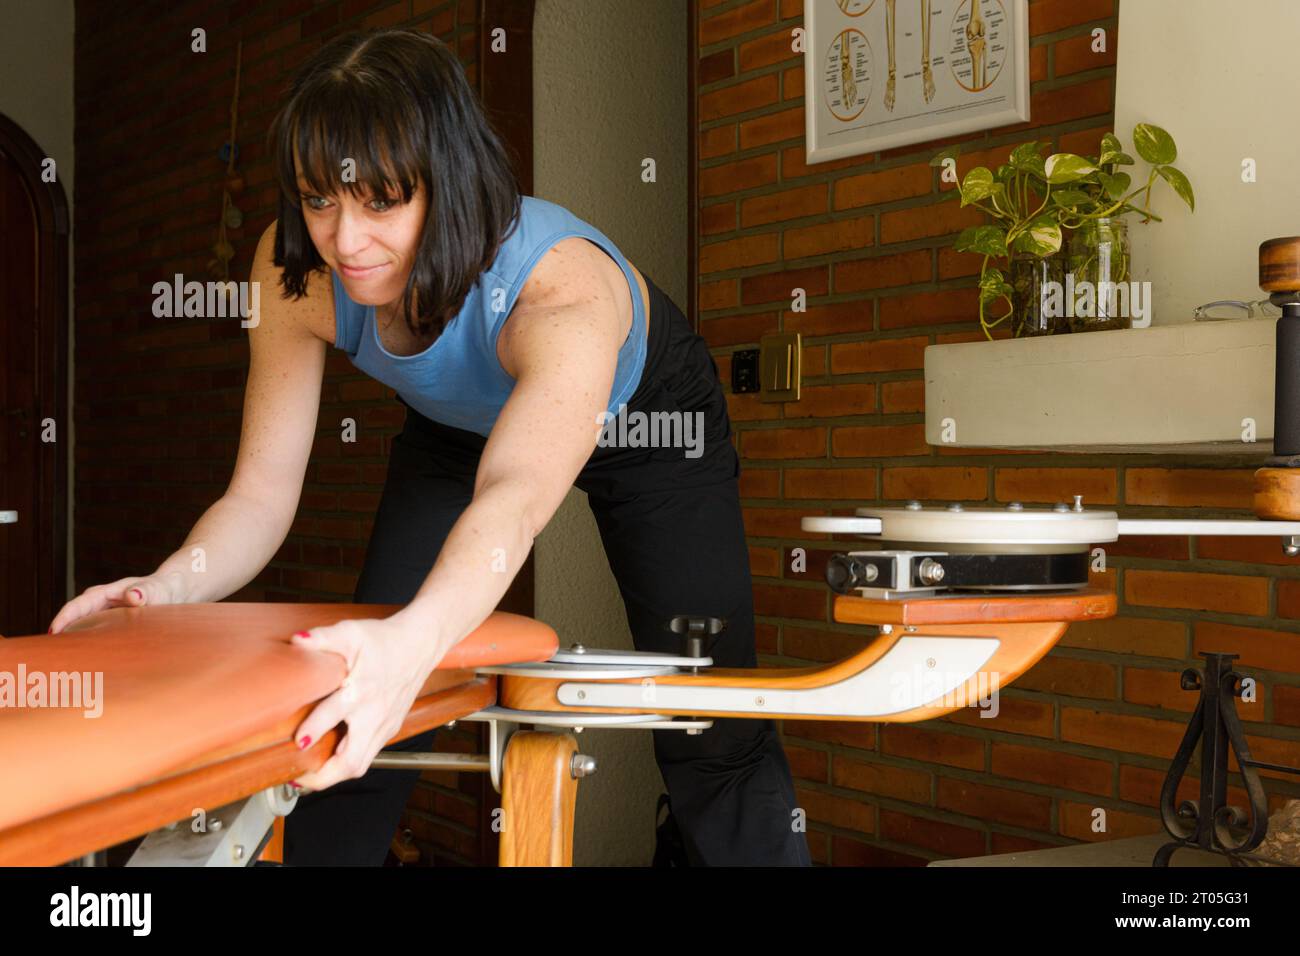 young caucasian woman wall at home positioning and arranging exercise machine training bench at home, preparing to exercise and train. Stock Photo